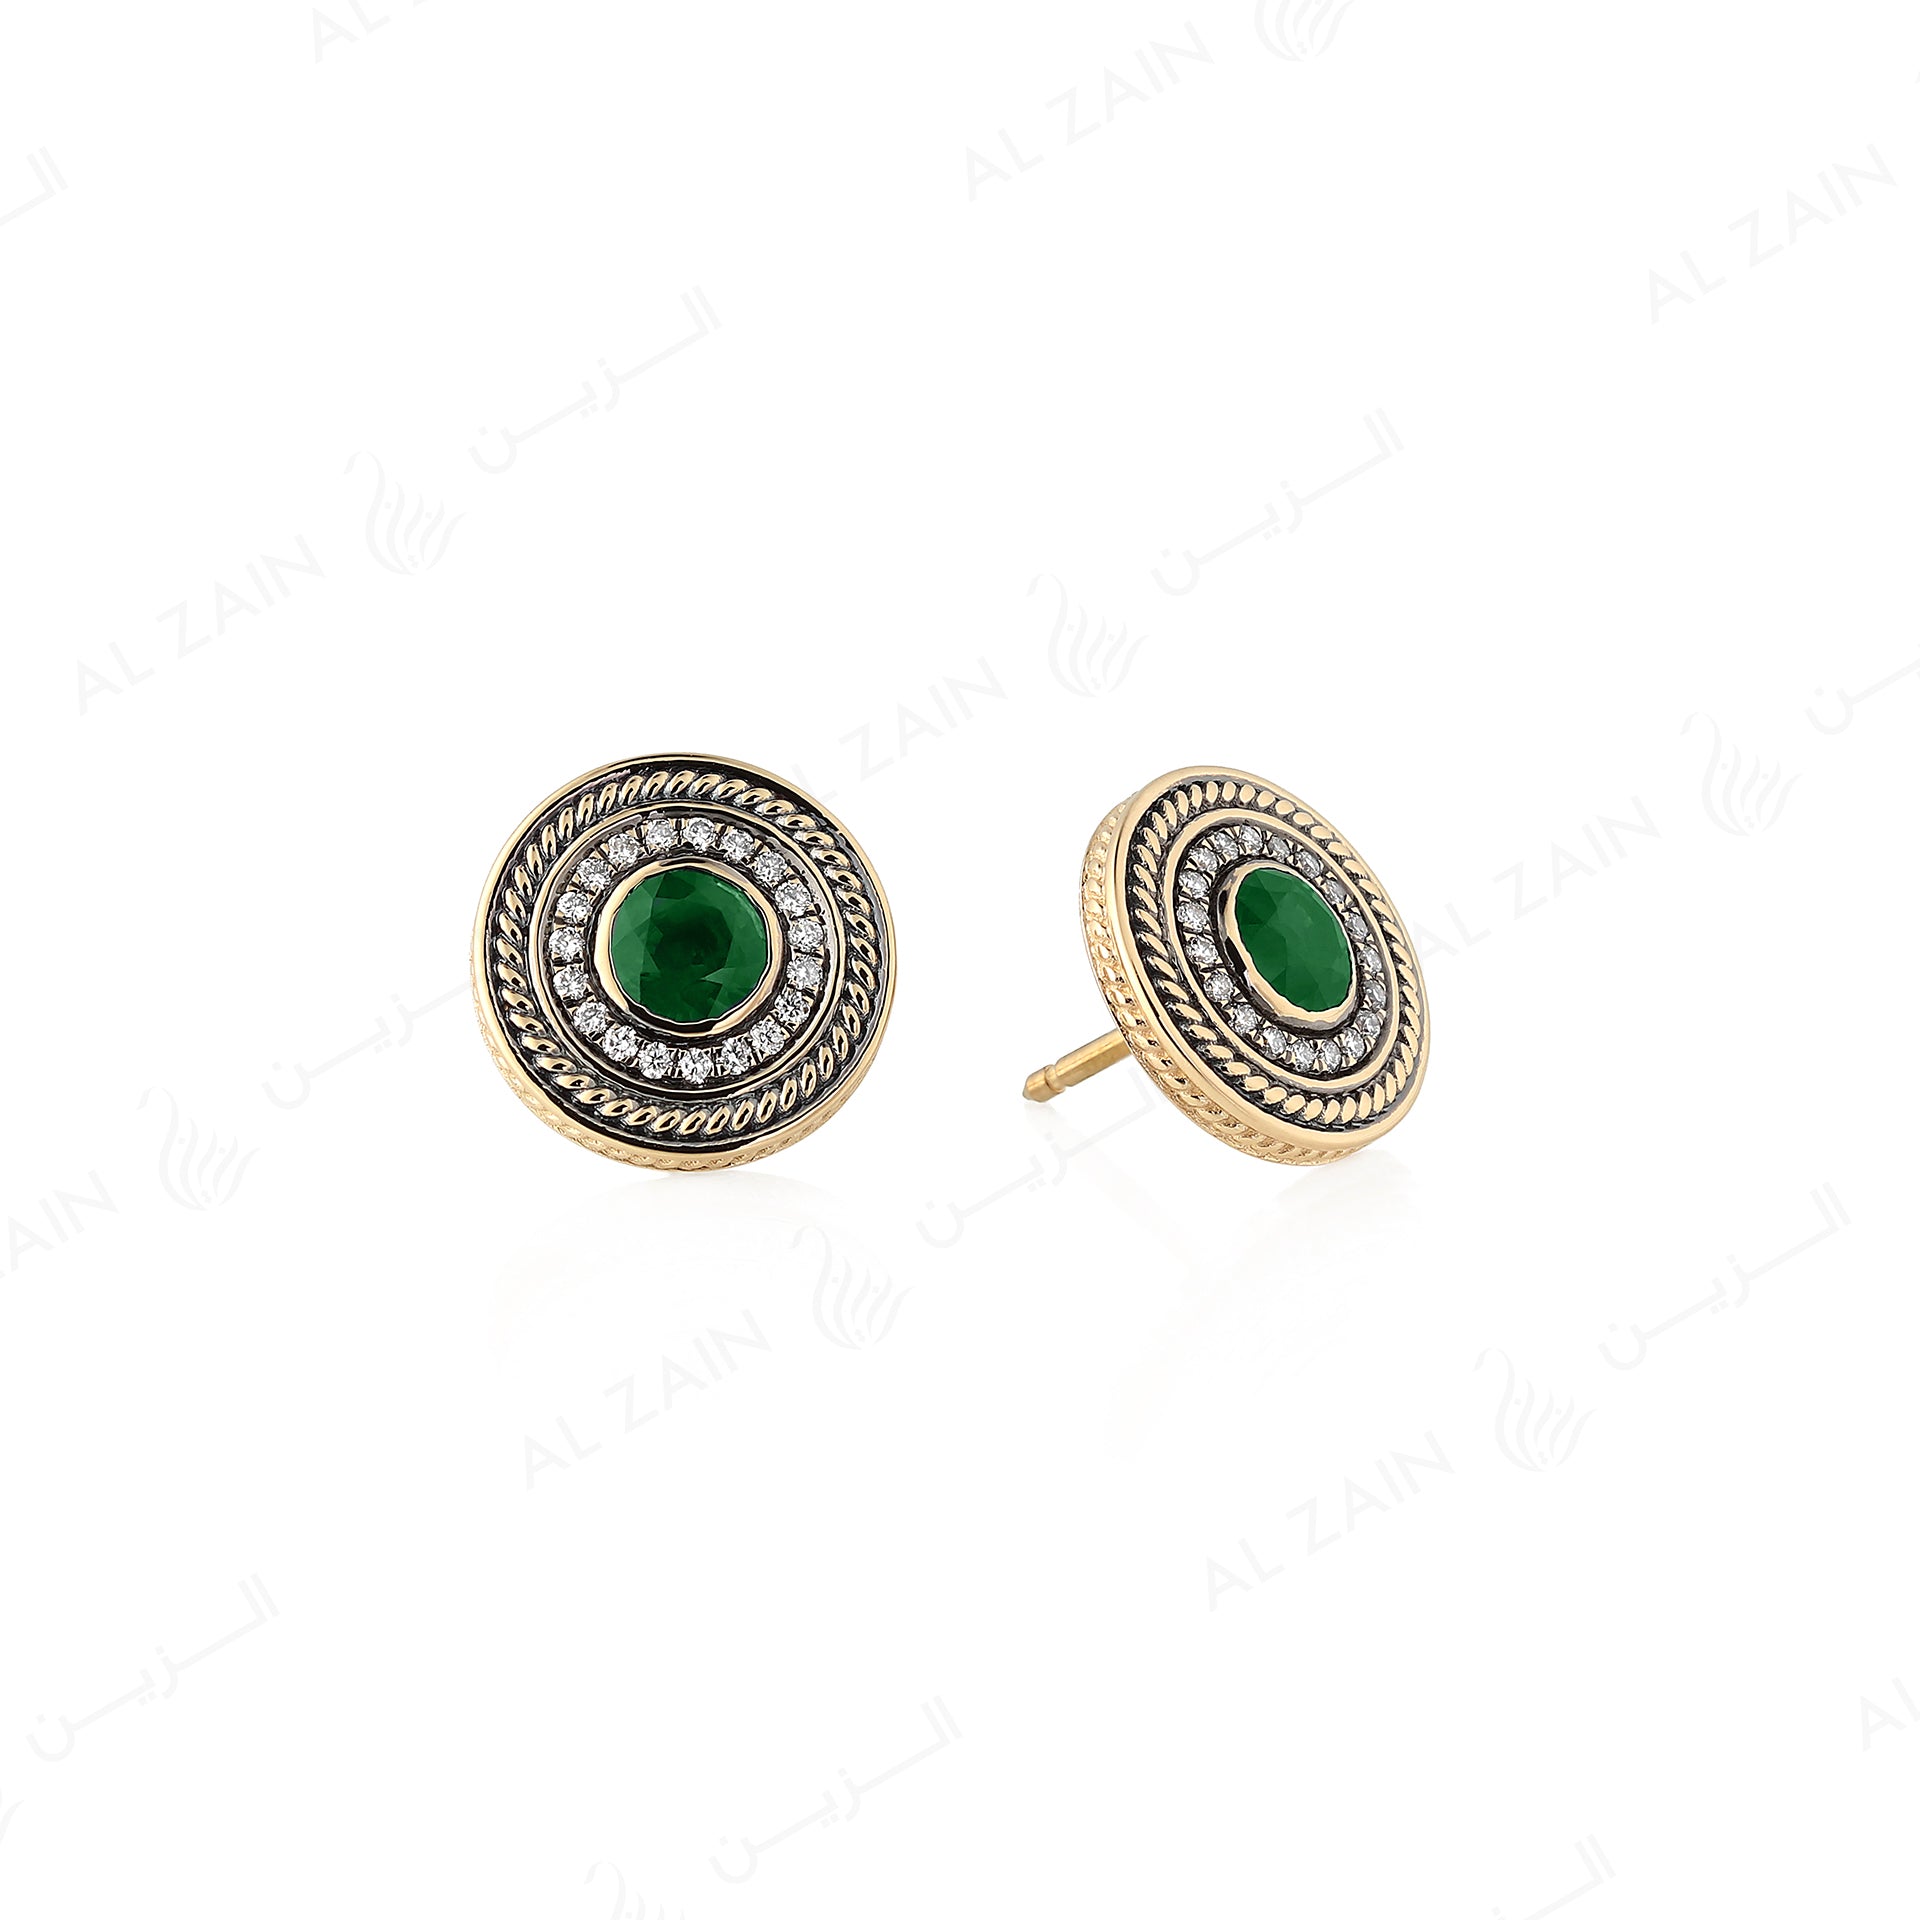 18k Antique Precious Medallion earrings in yellow gold with emerald and diamonds